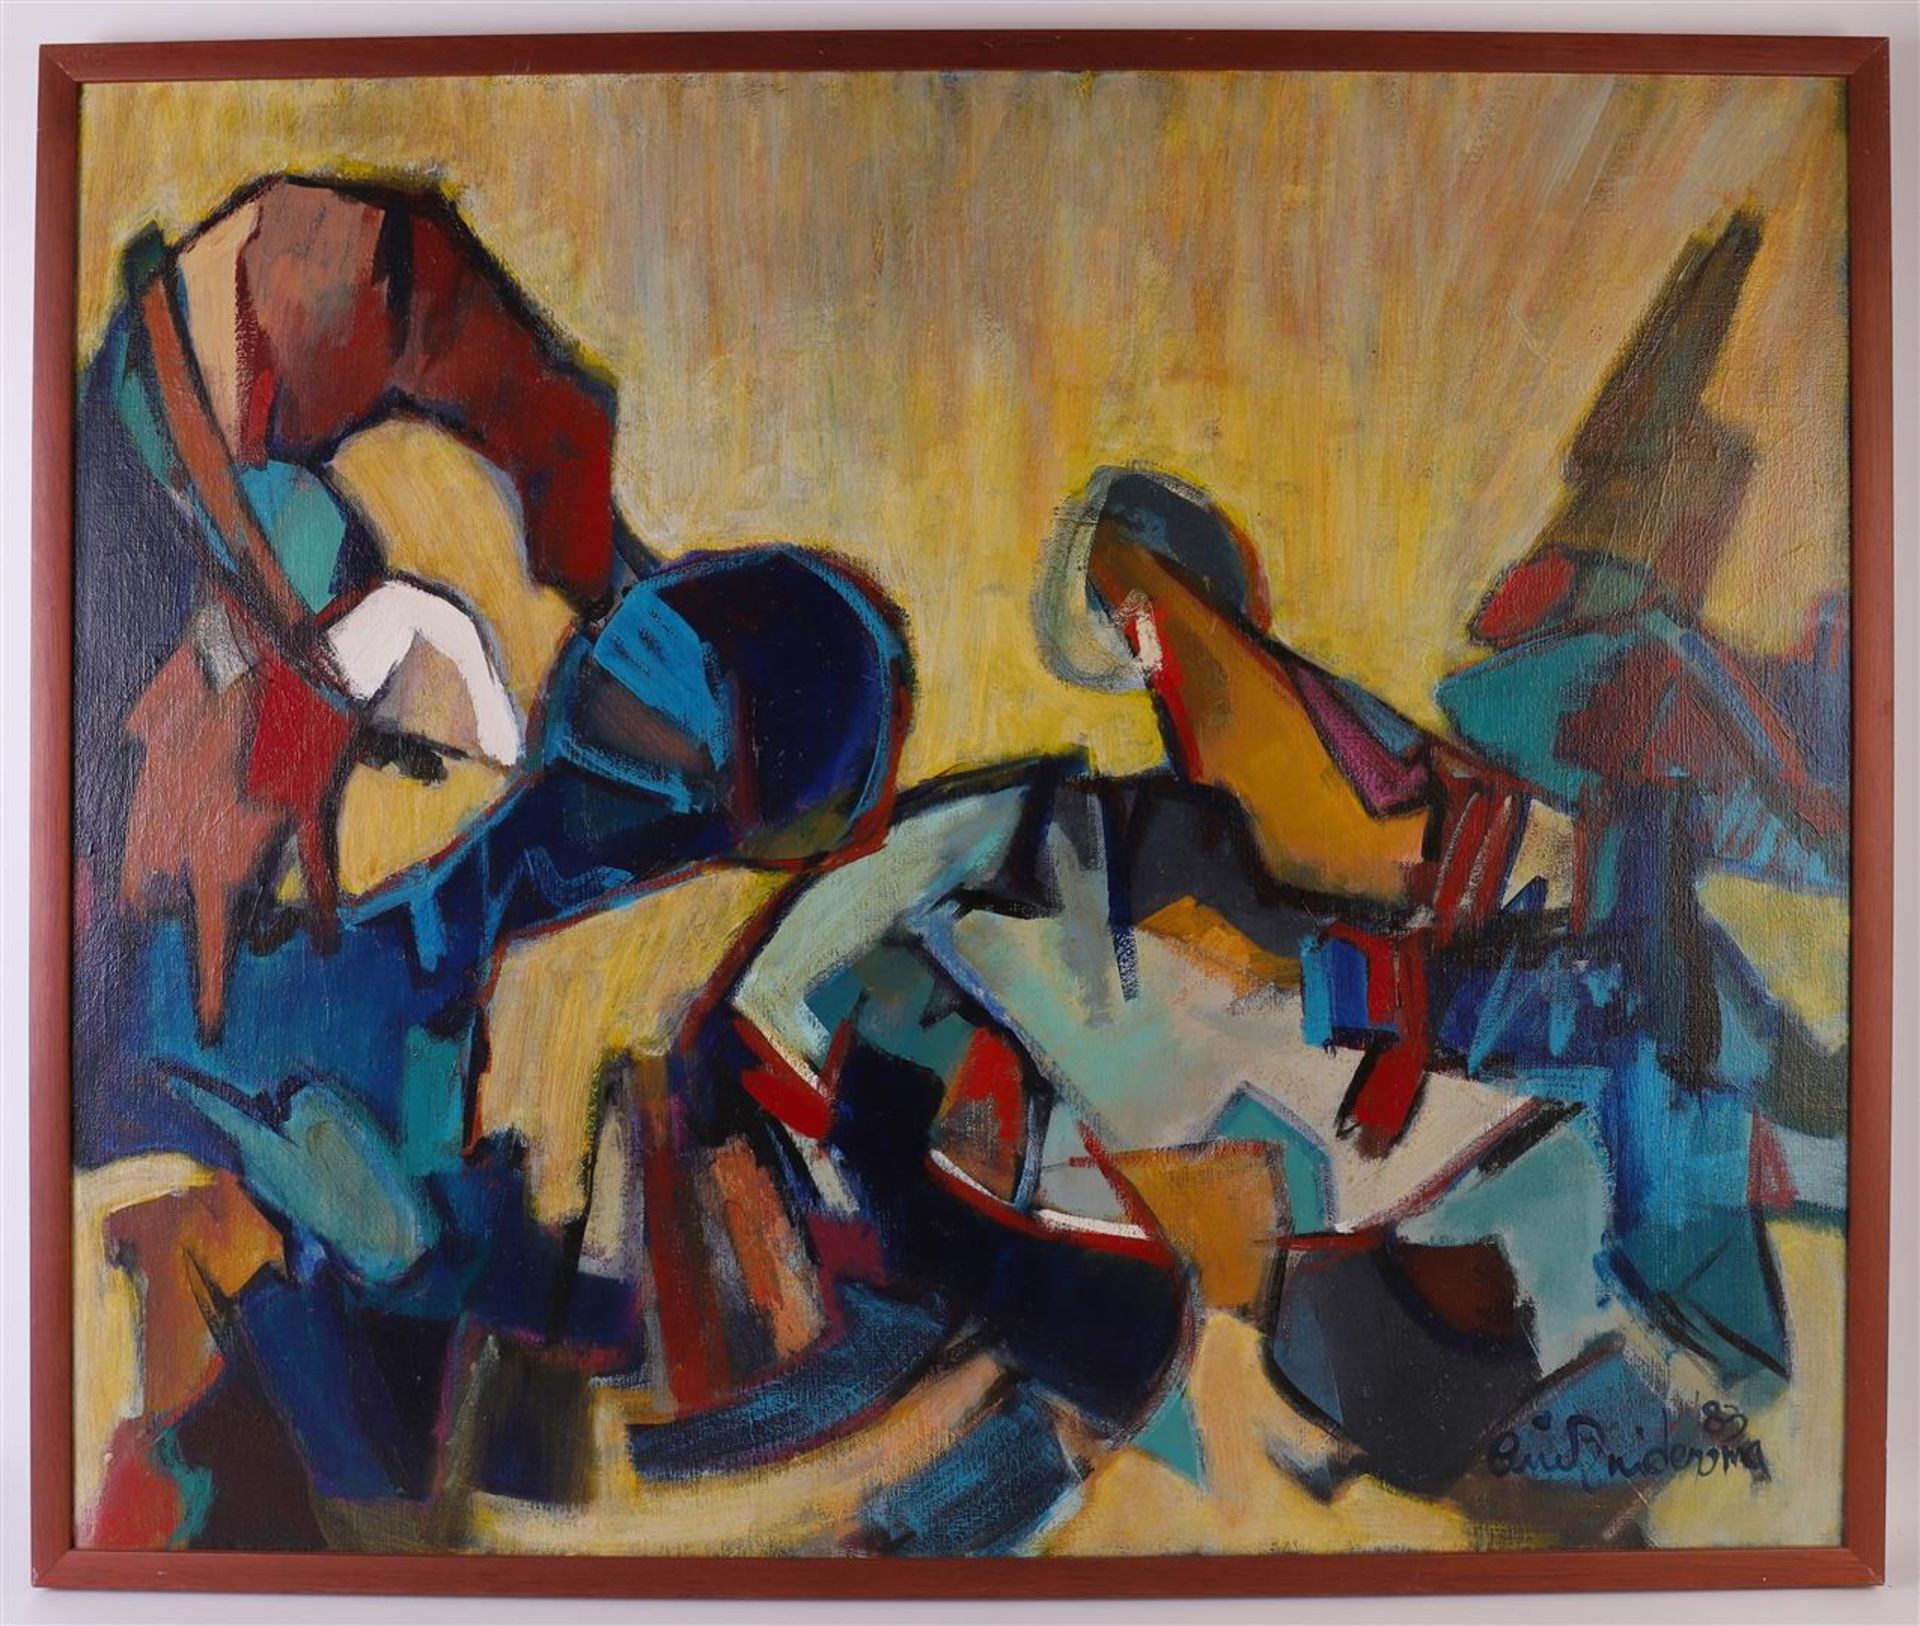 Zuidersma, Arie (Emmen 1925-Zuidlaren 2014) "Composition 836", signed in full right and '83 / verso,